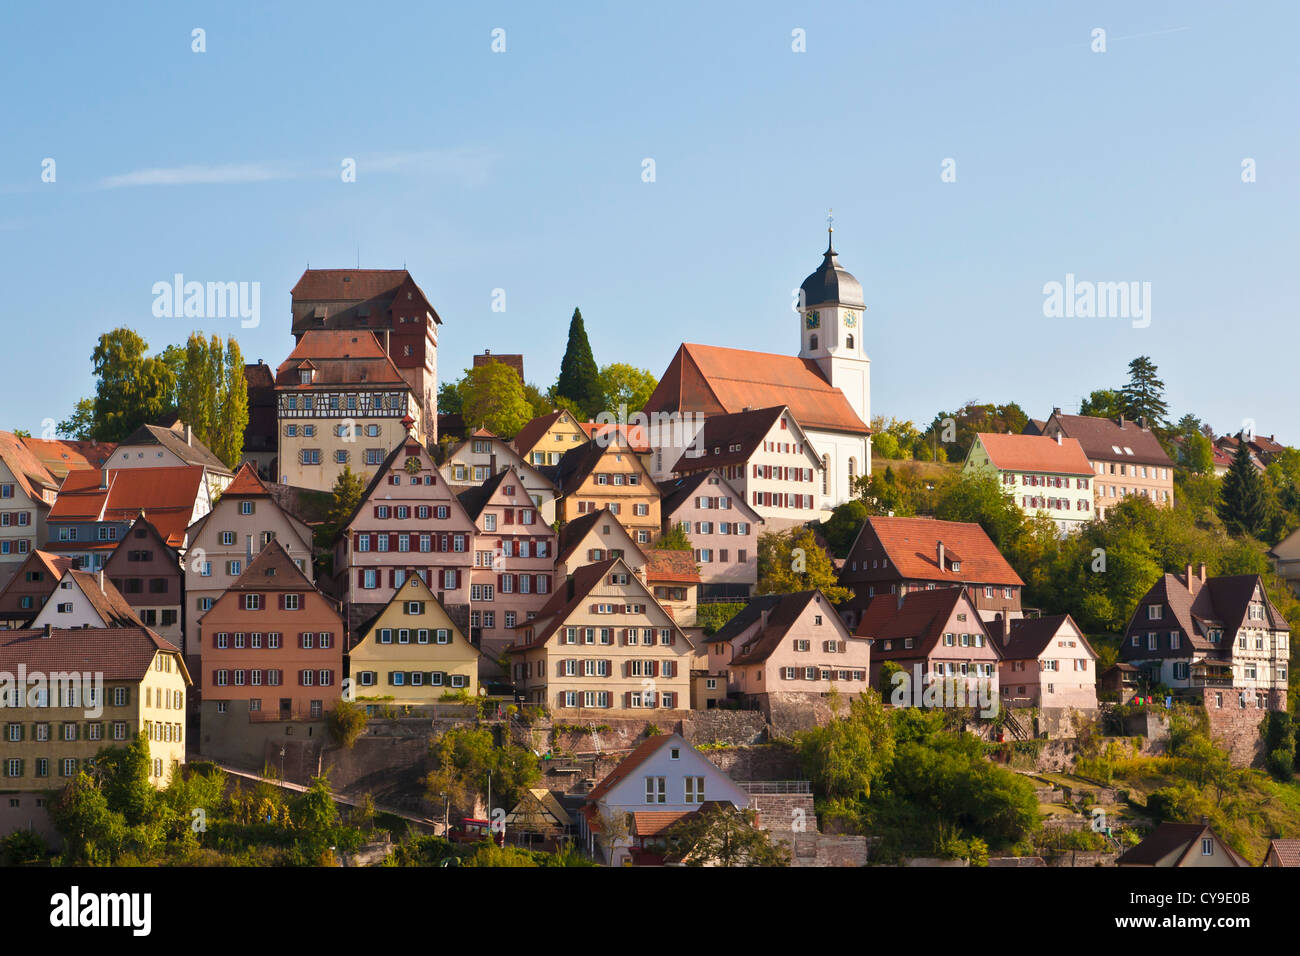 VIEW OF ALTENSTEIG, NORTHERN BLACK FOREST, BADEN-WUERTTEMBERG, GERMANY Stock Photo